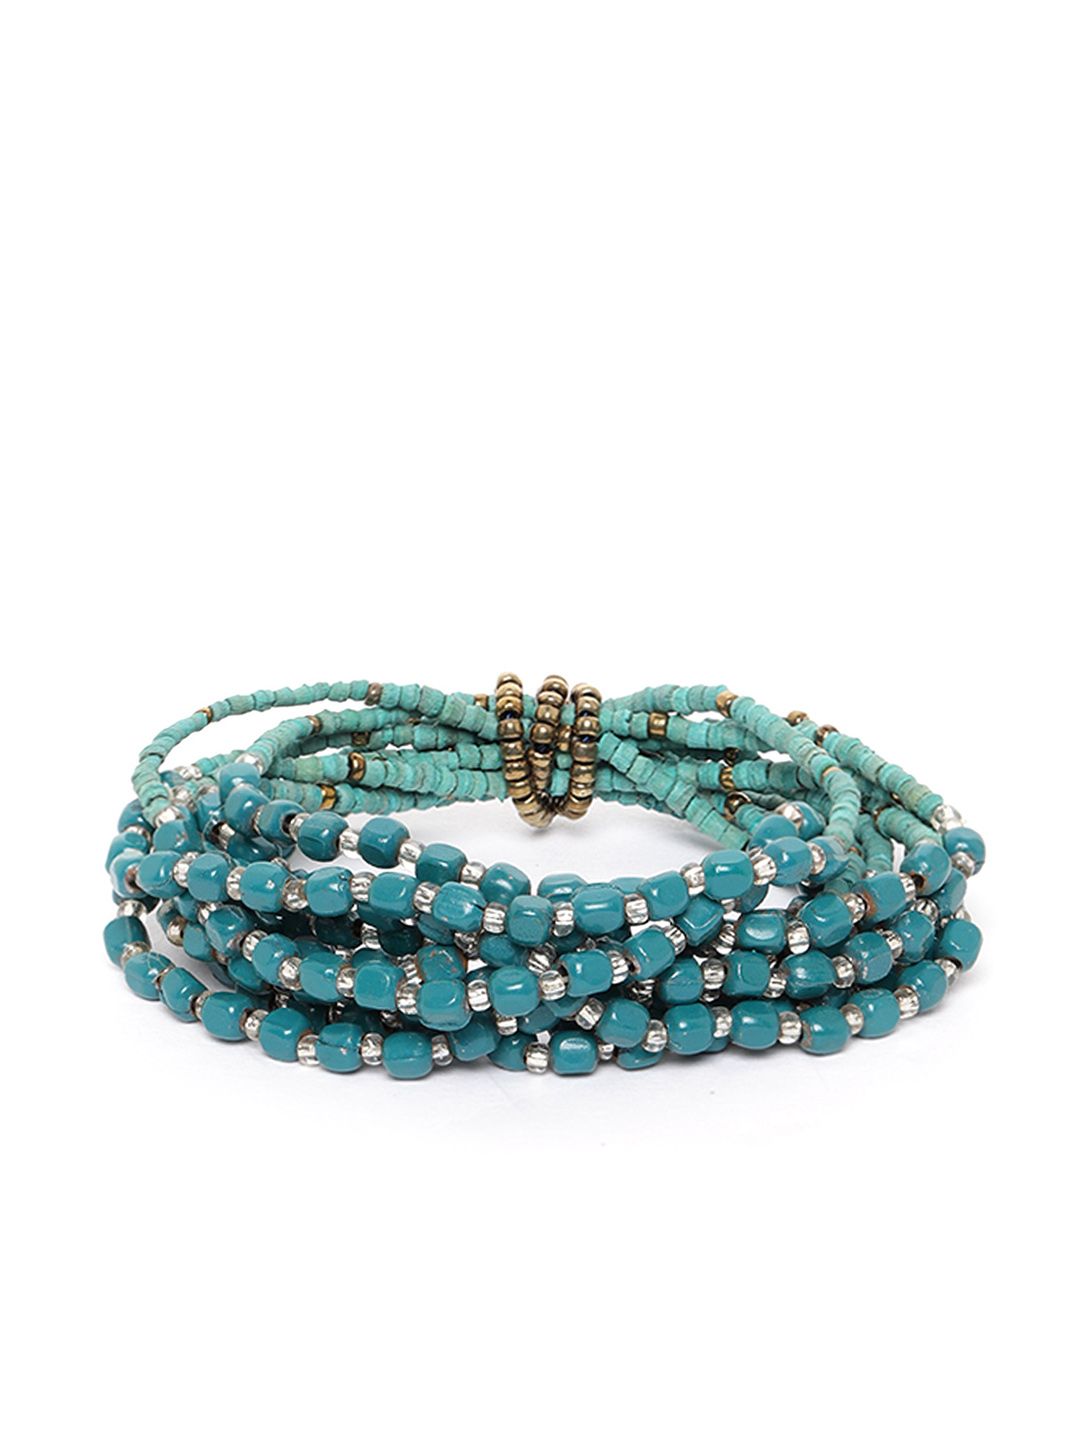 RICHEERA Teal Green & Antique Gold-Toned Beaded Multistranded Elasticated Bracelet Price in India